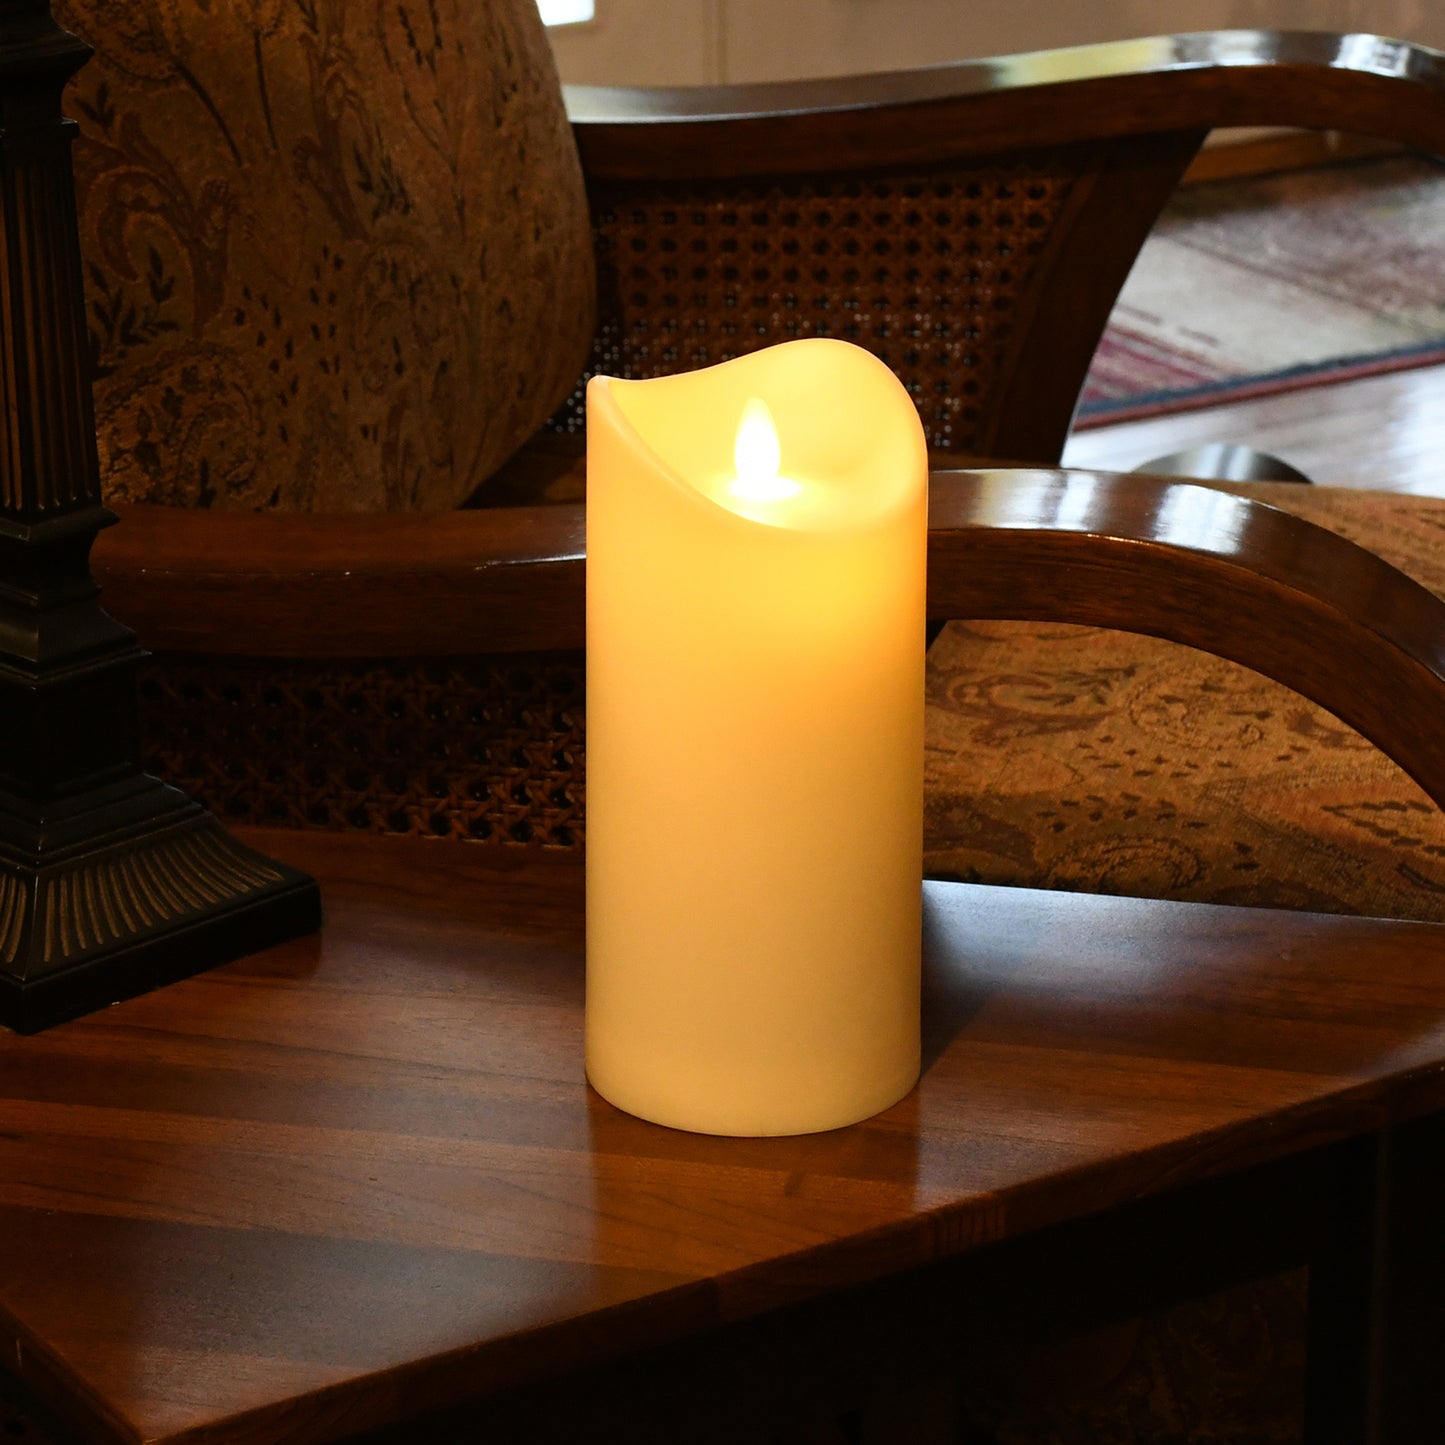 Battery Operated 7" Pillar Candle with Flickering Flame